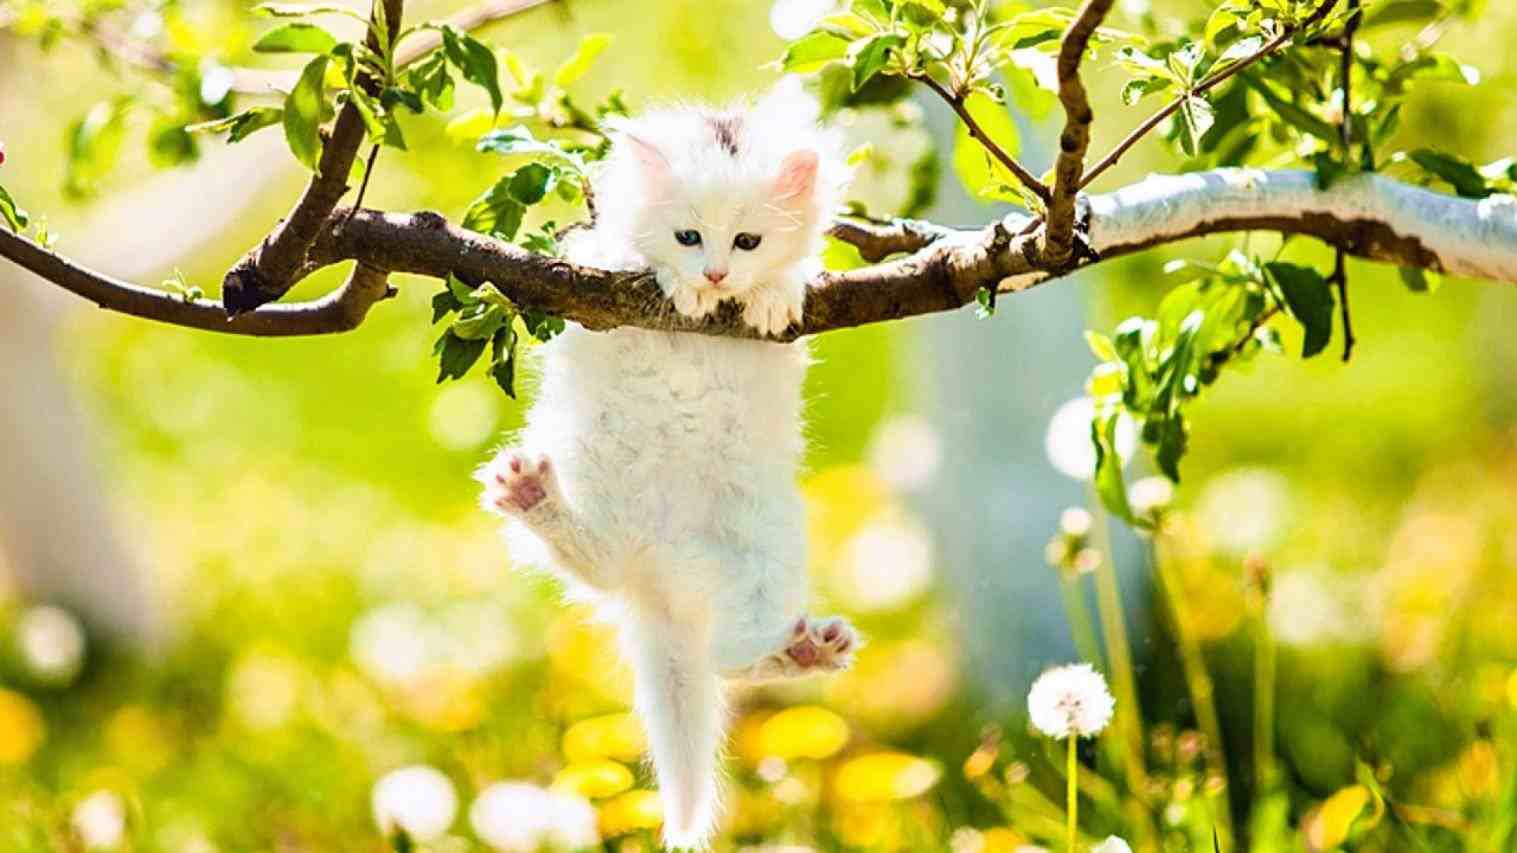 The Image Collection of Spring picture with animals wallpaper